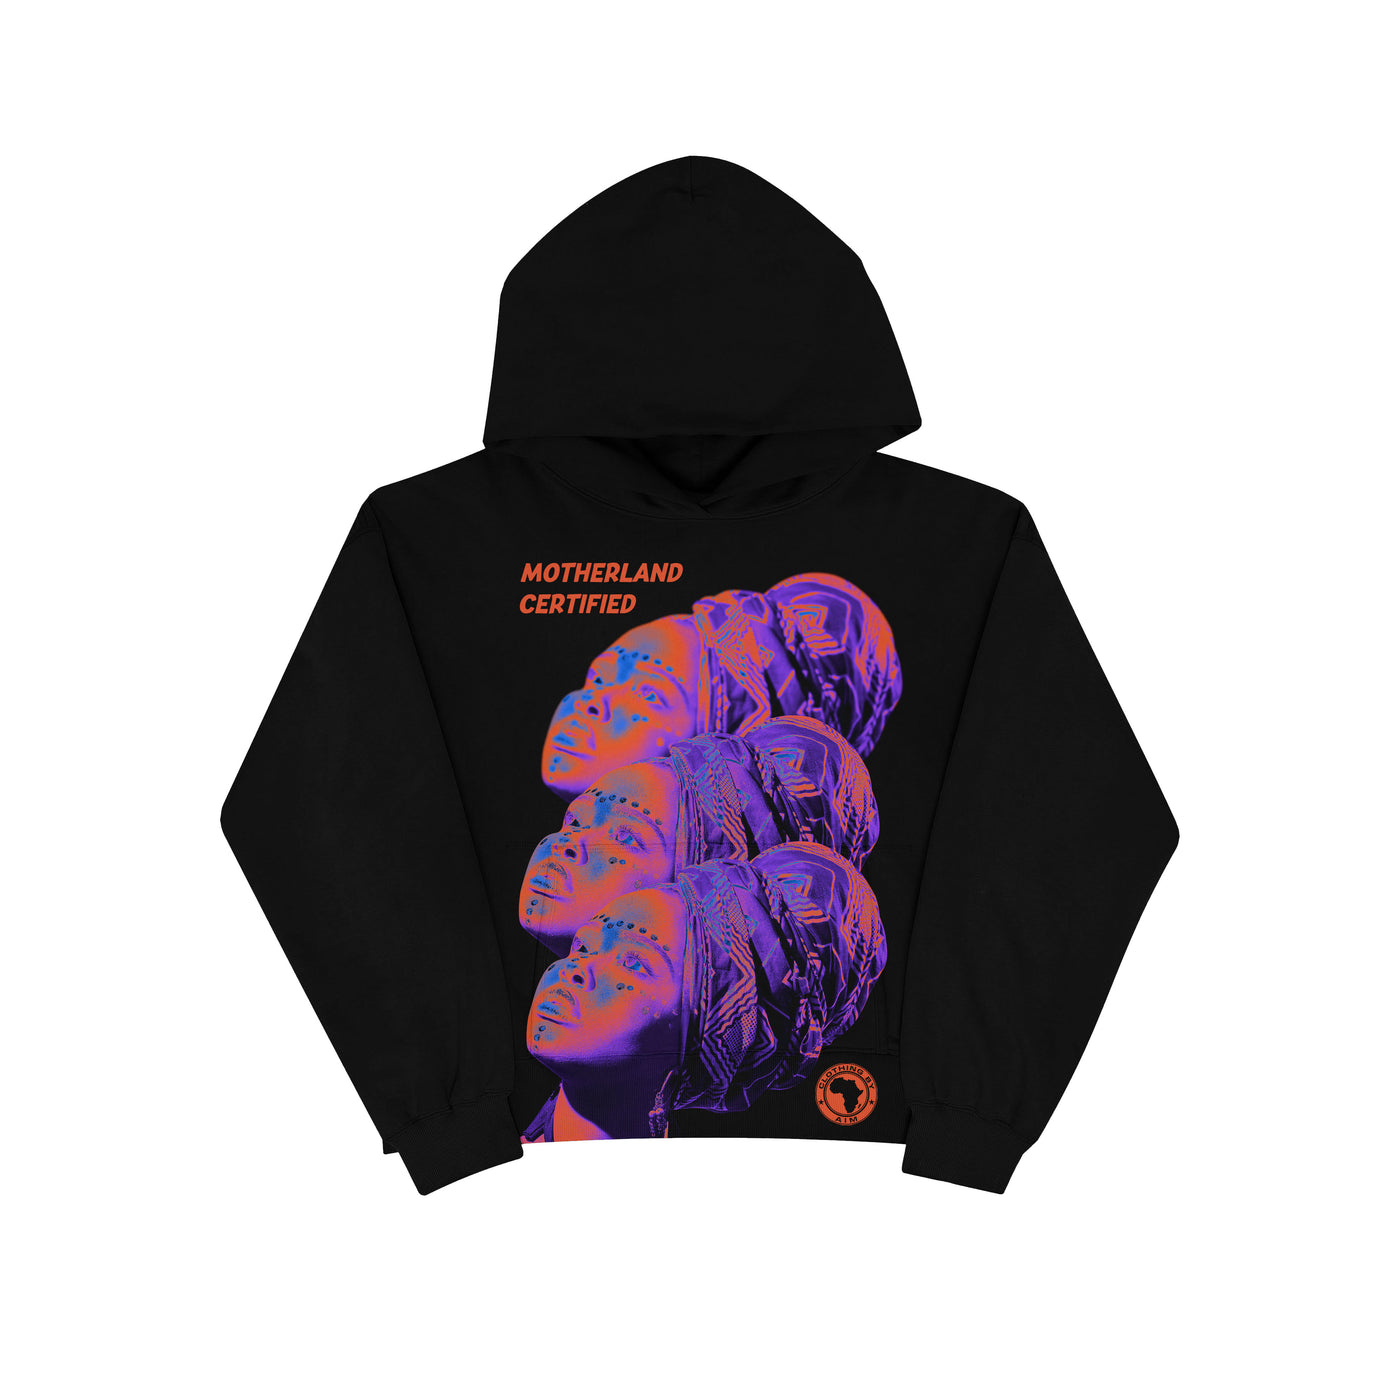 Empowered Woman Hoodie